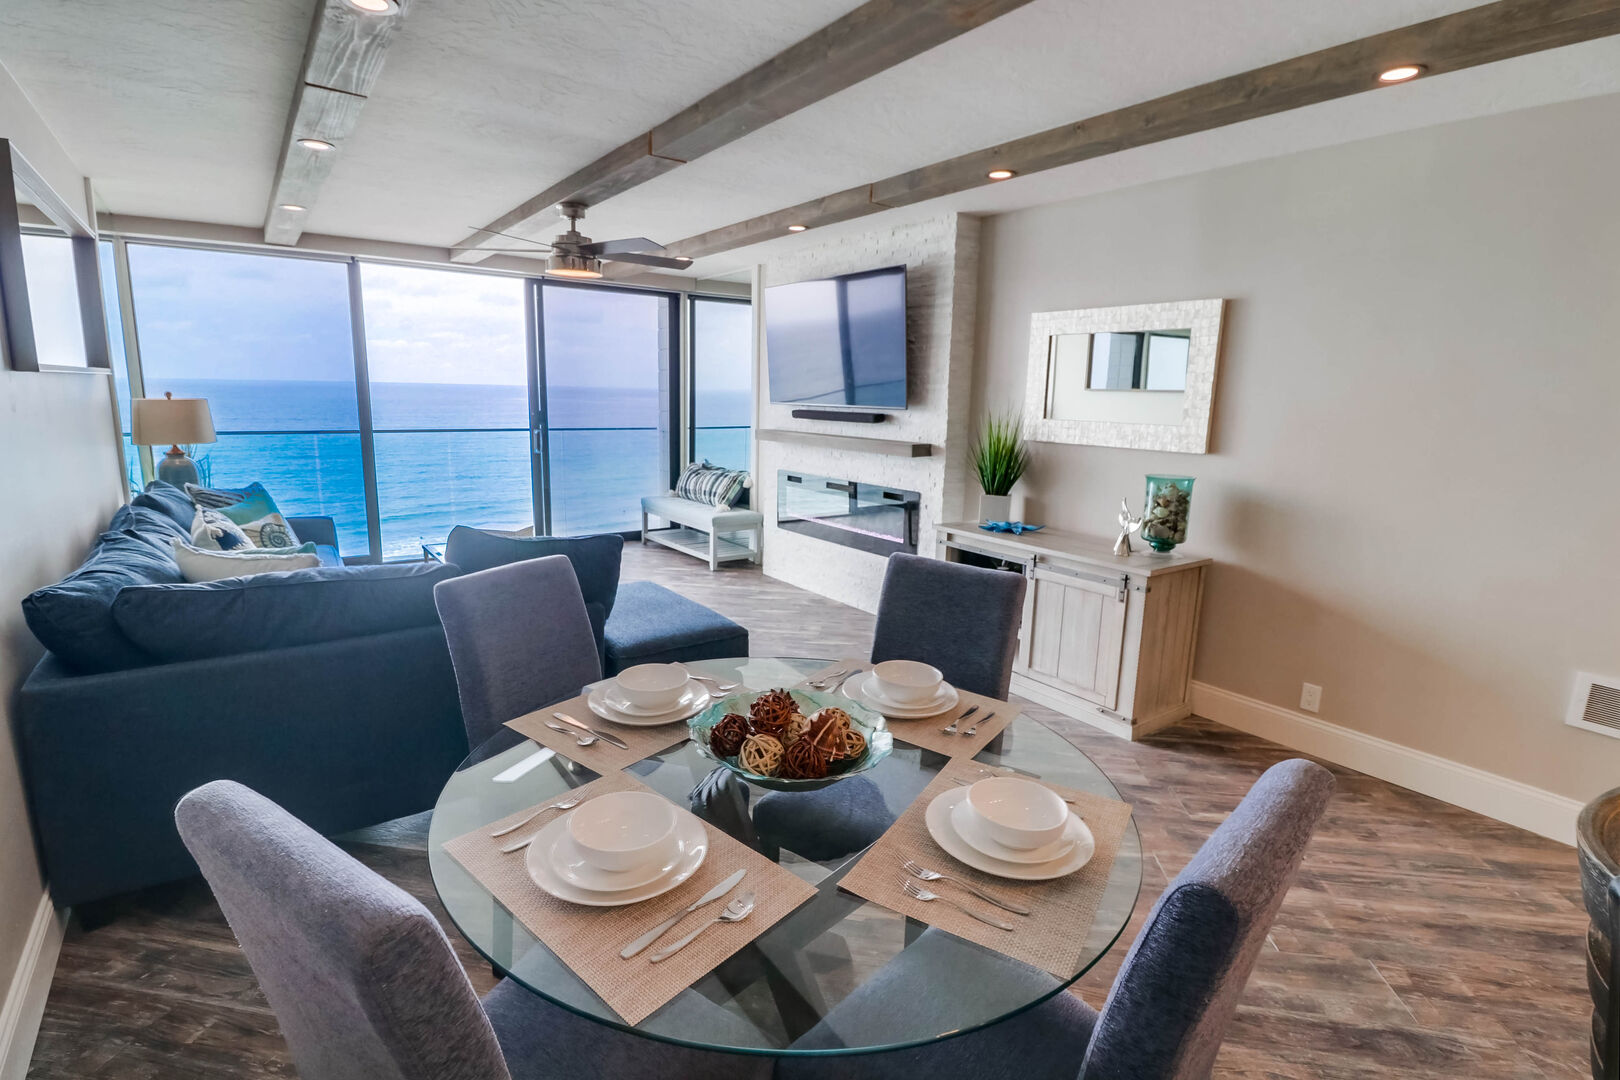 Open floor plan with dining area for 4, living room, kitchen and ocean views